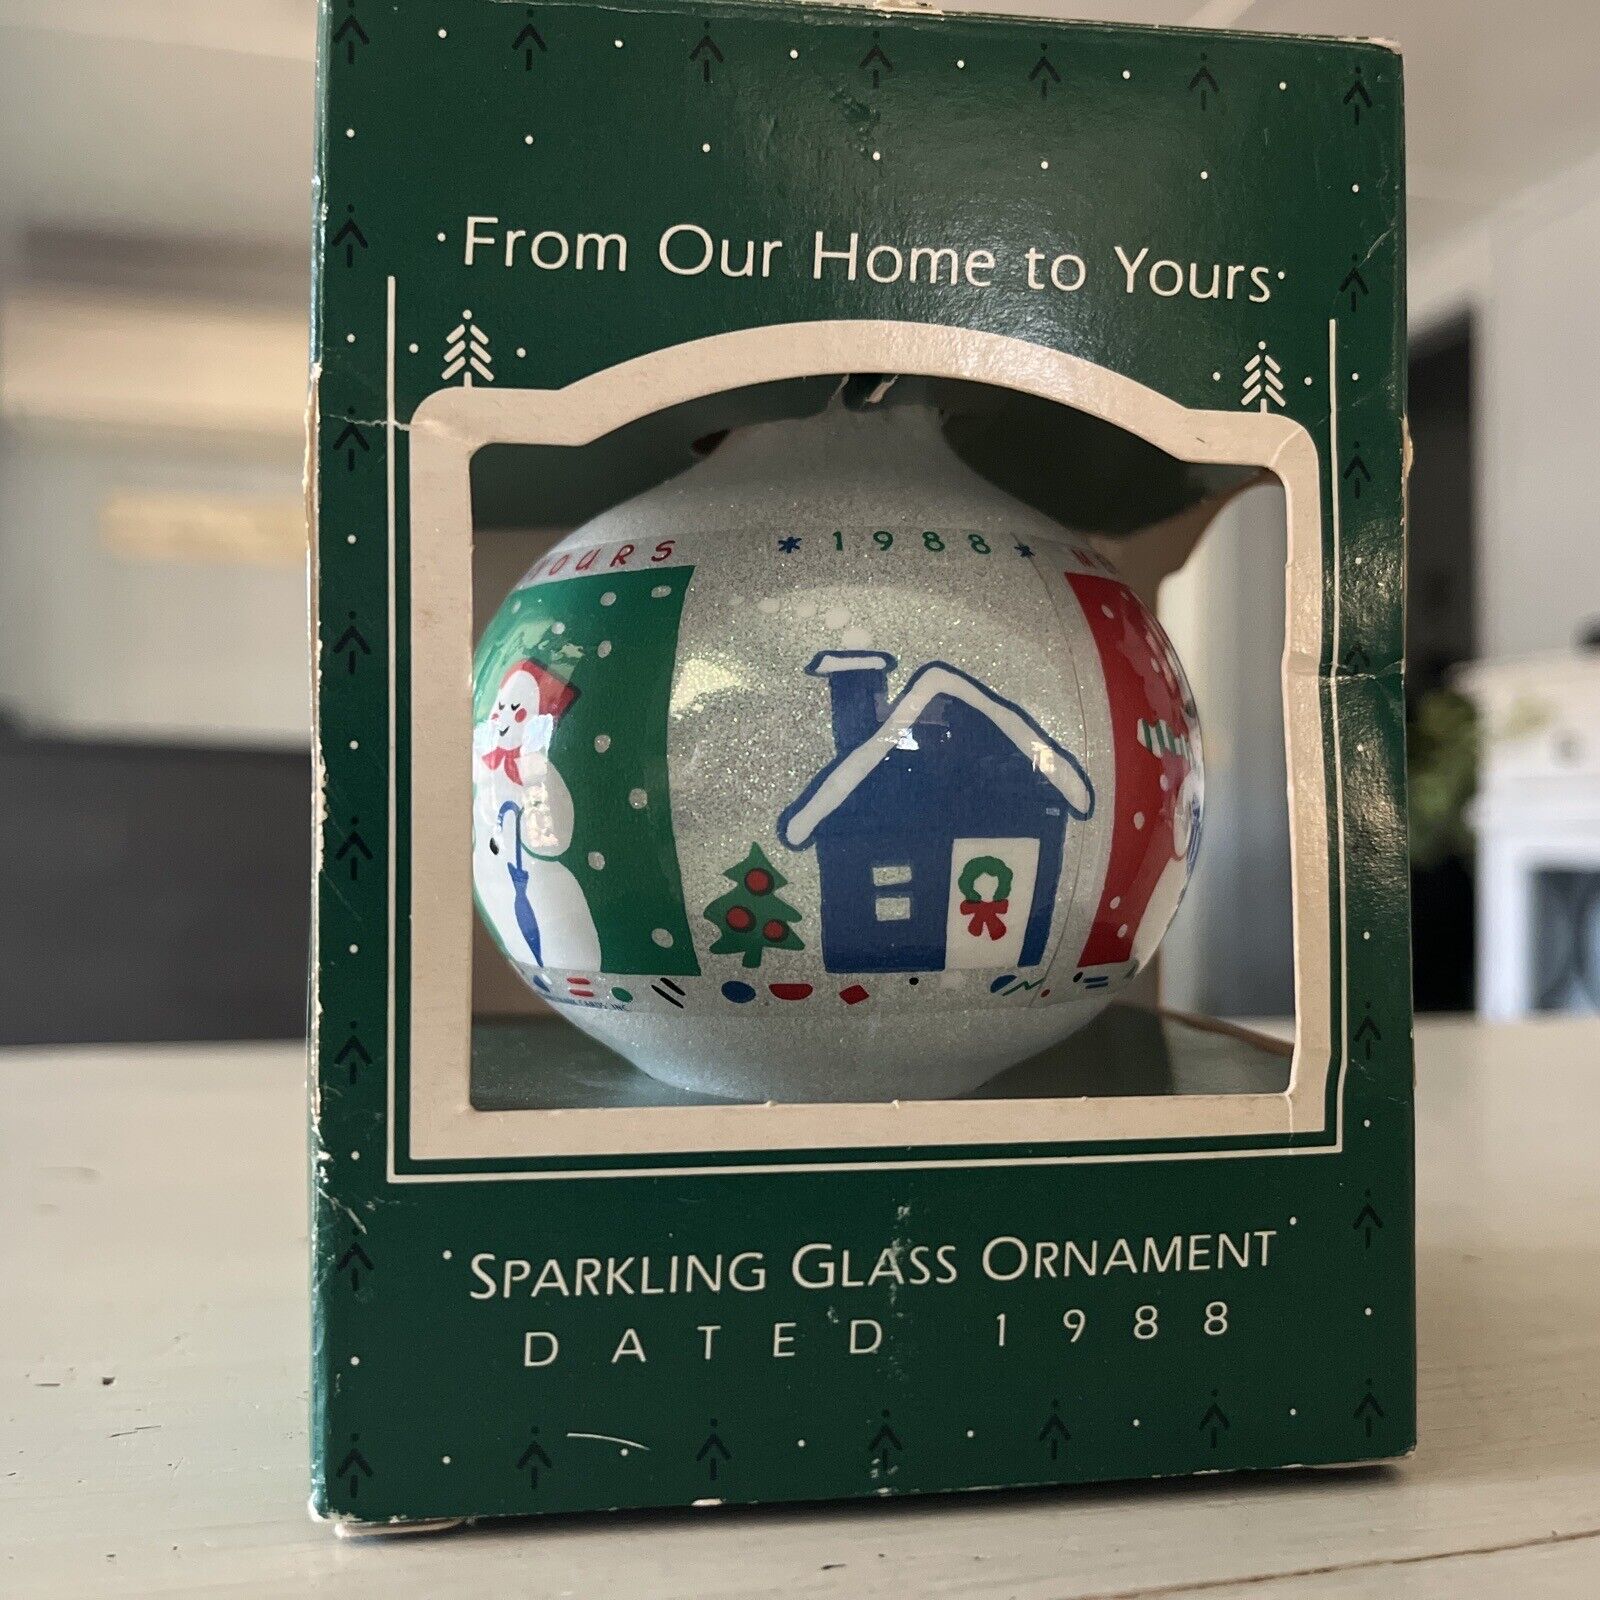 Hallmark Ornament 1988 “From Our Home to Yours” Sparkling Glass